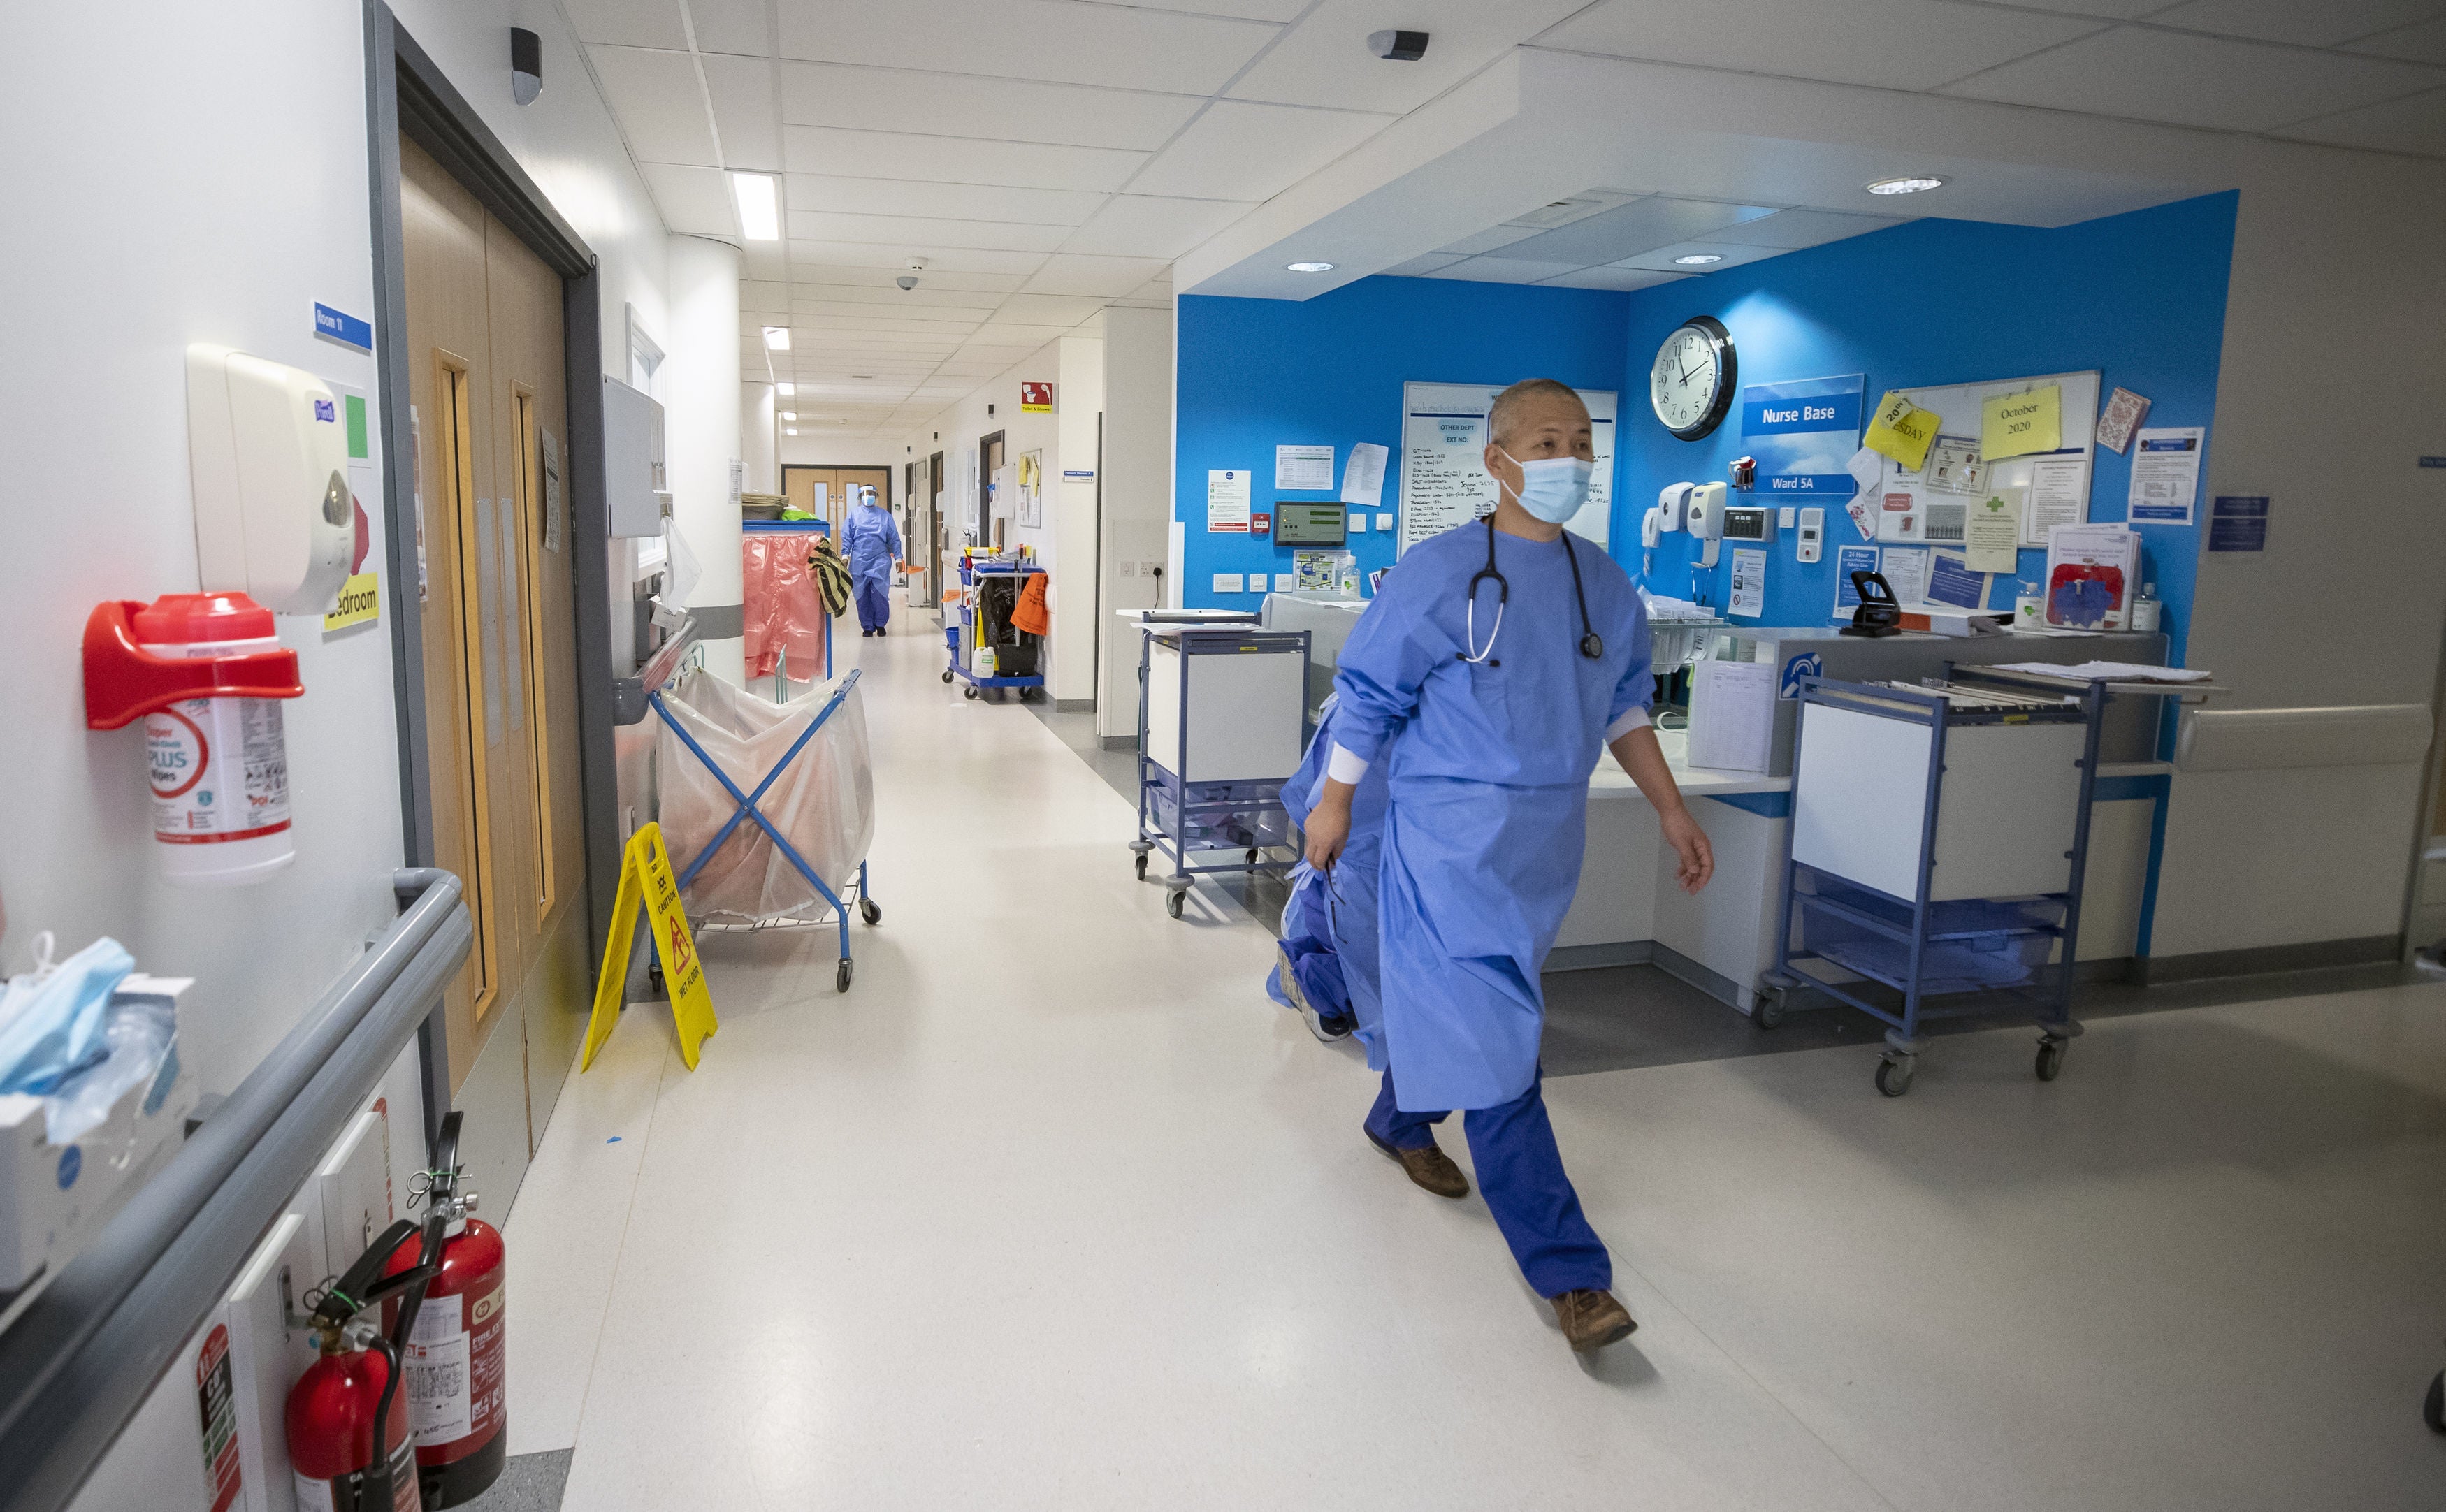 Medical staff will be helped by council workers on the wards (Peter Byrne/PA)